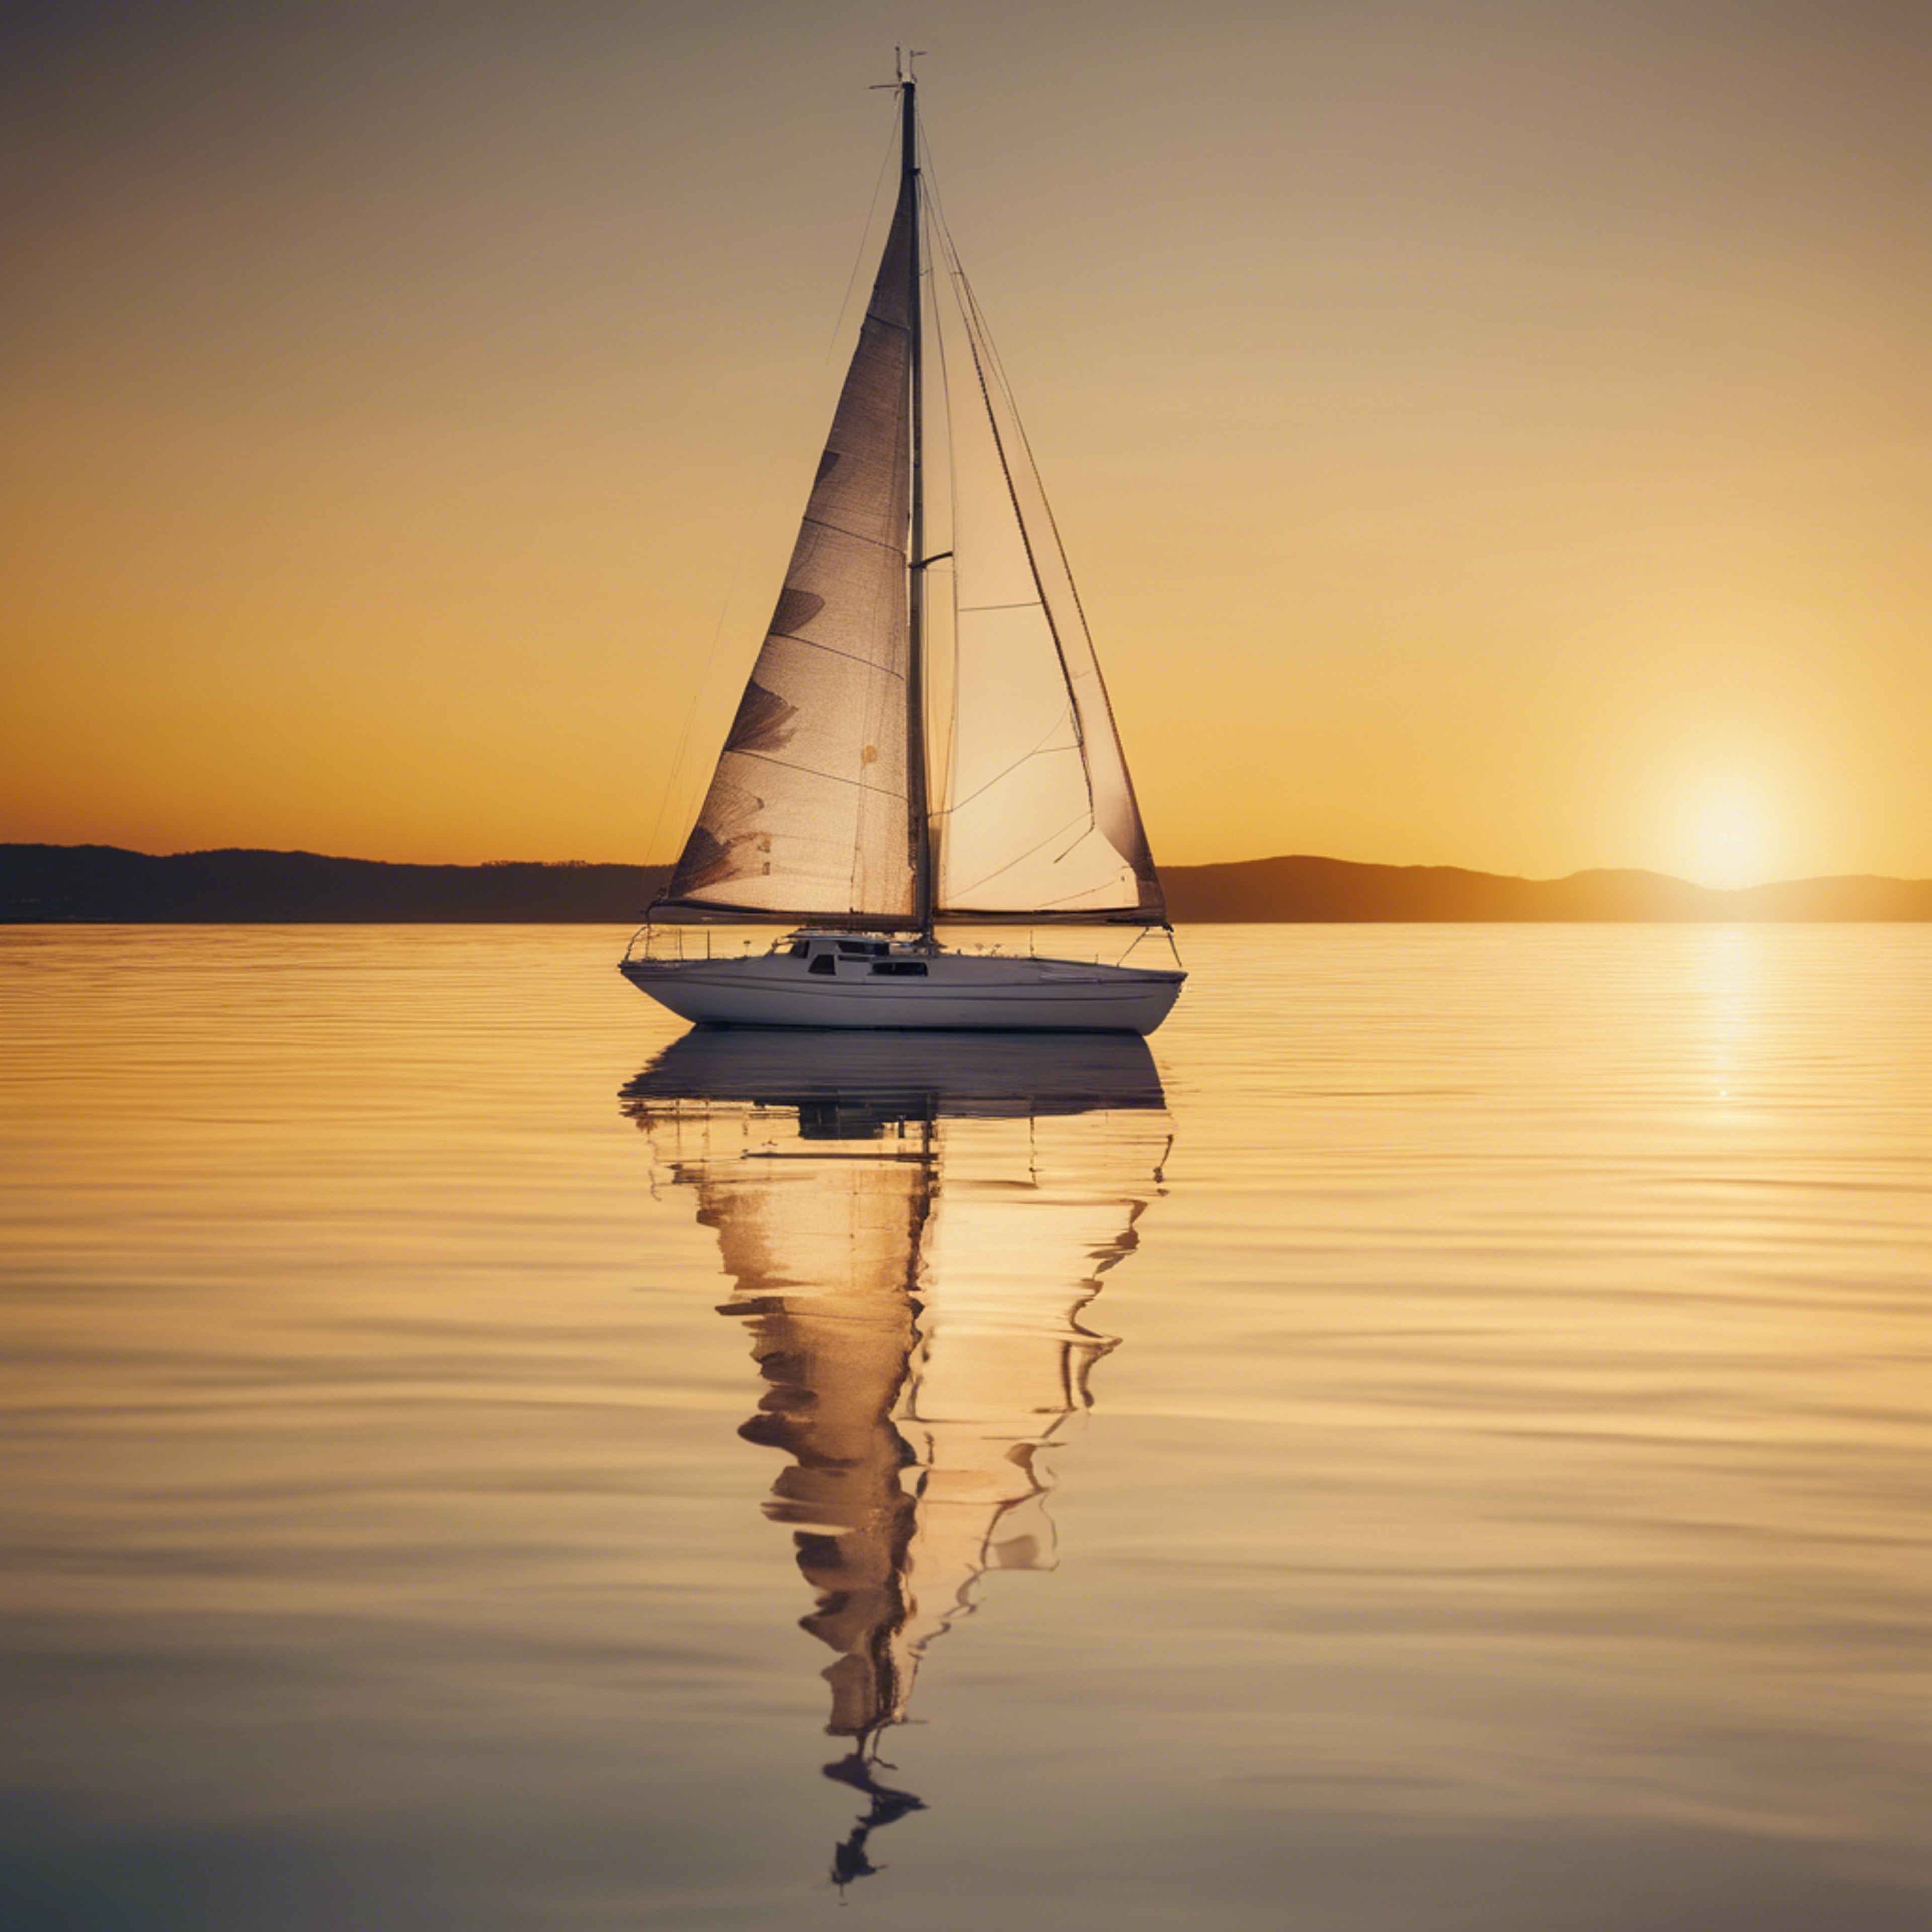 A picturesque scene of a white sailboat floating on a sea of shimmering yellow gold at sunset.壁紙[7609f41ea04949c9a6f7]